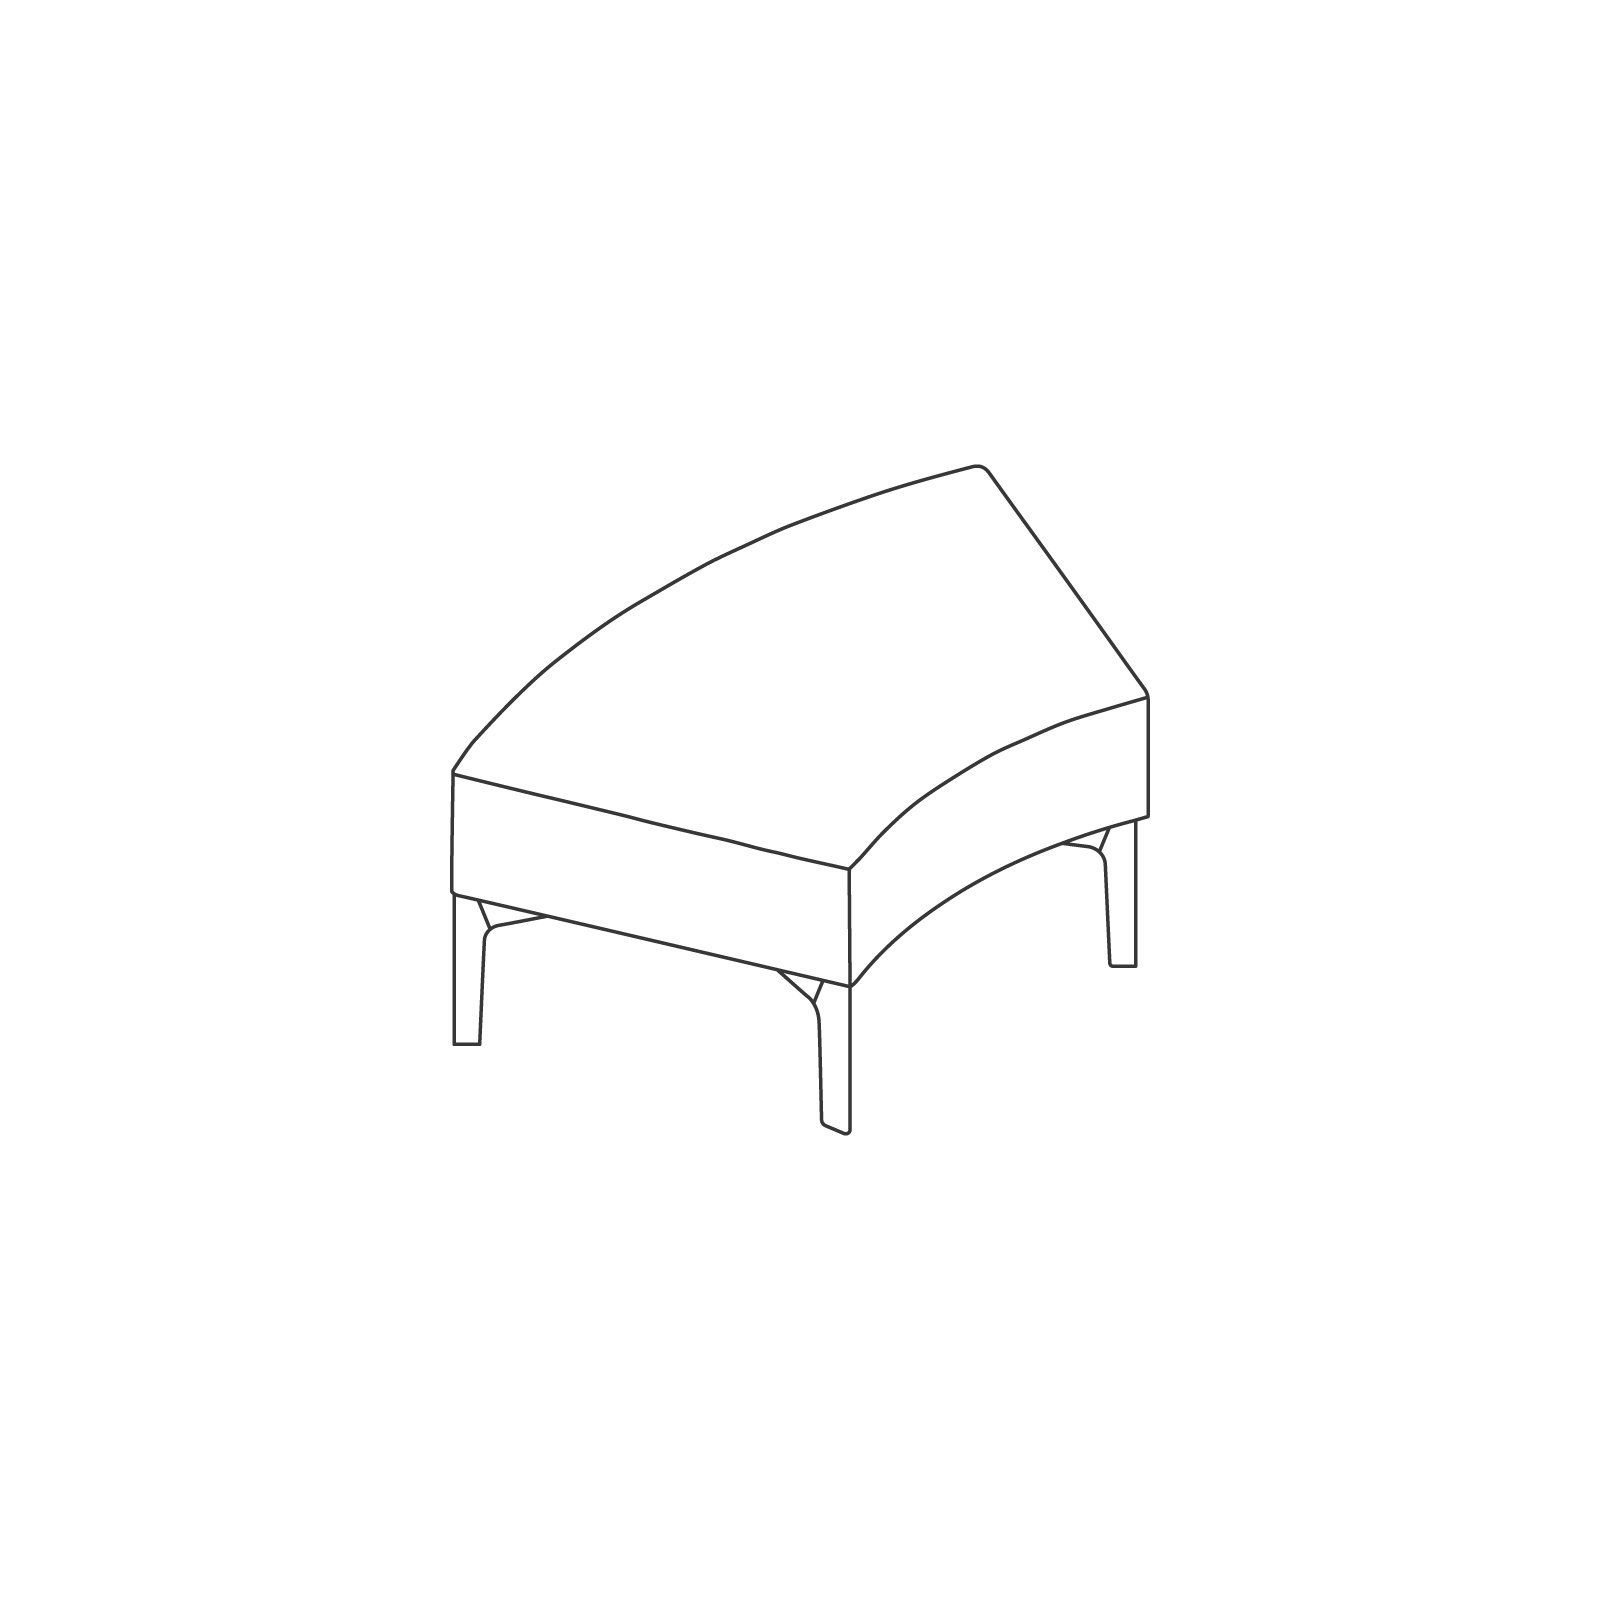 A line drawing - Symbol Bench–45-Degree Curve